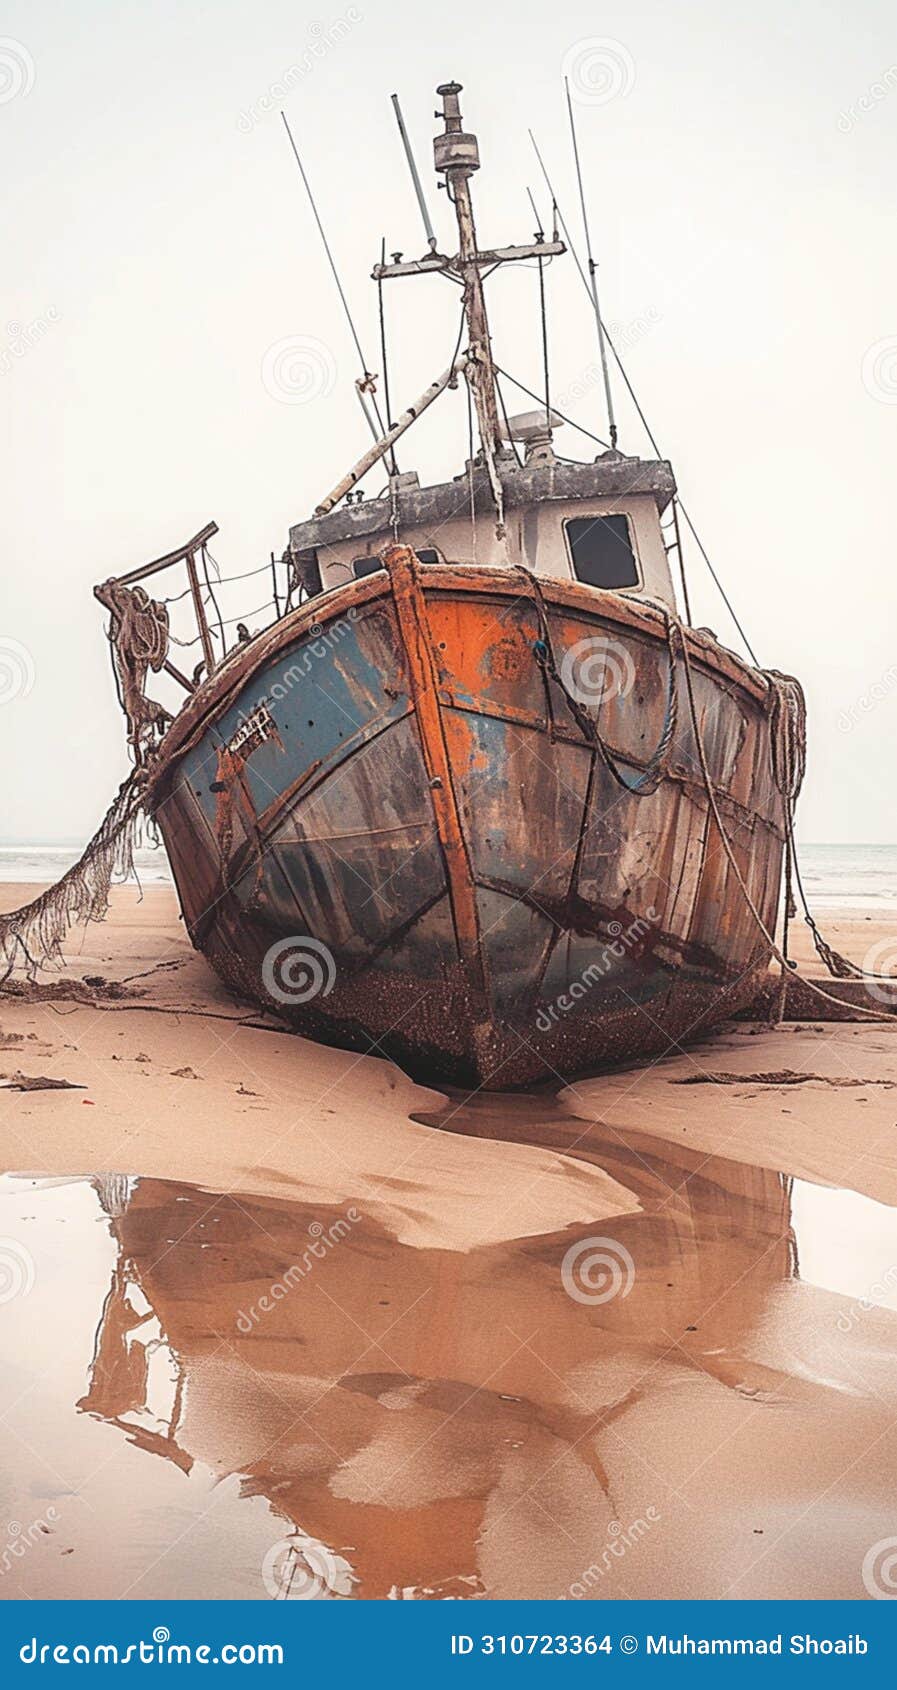 rustic fishing boat stranded on sandy shore, a relic of seafaring days